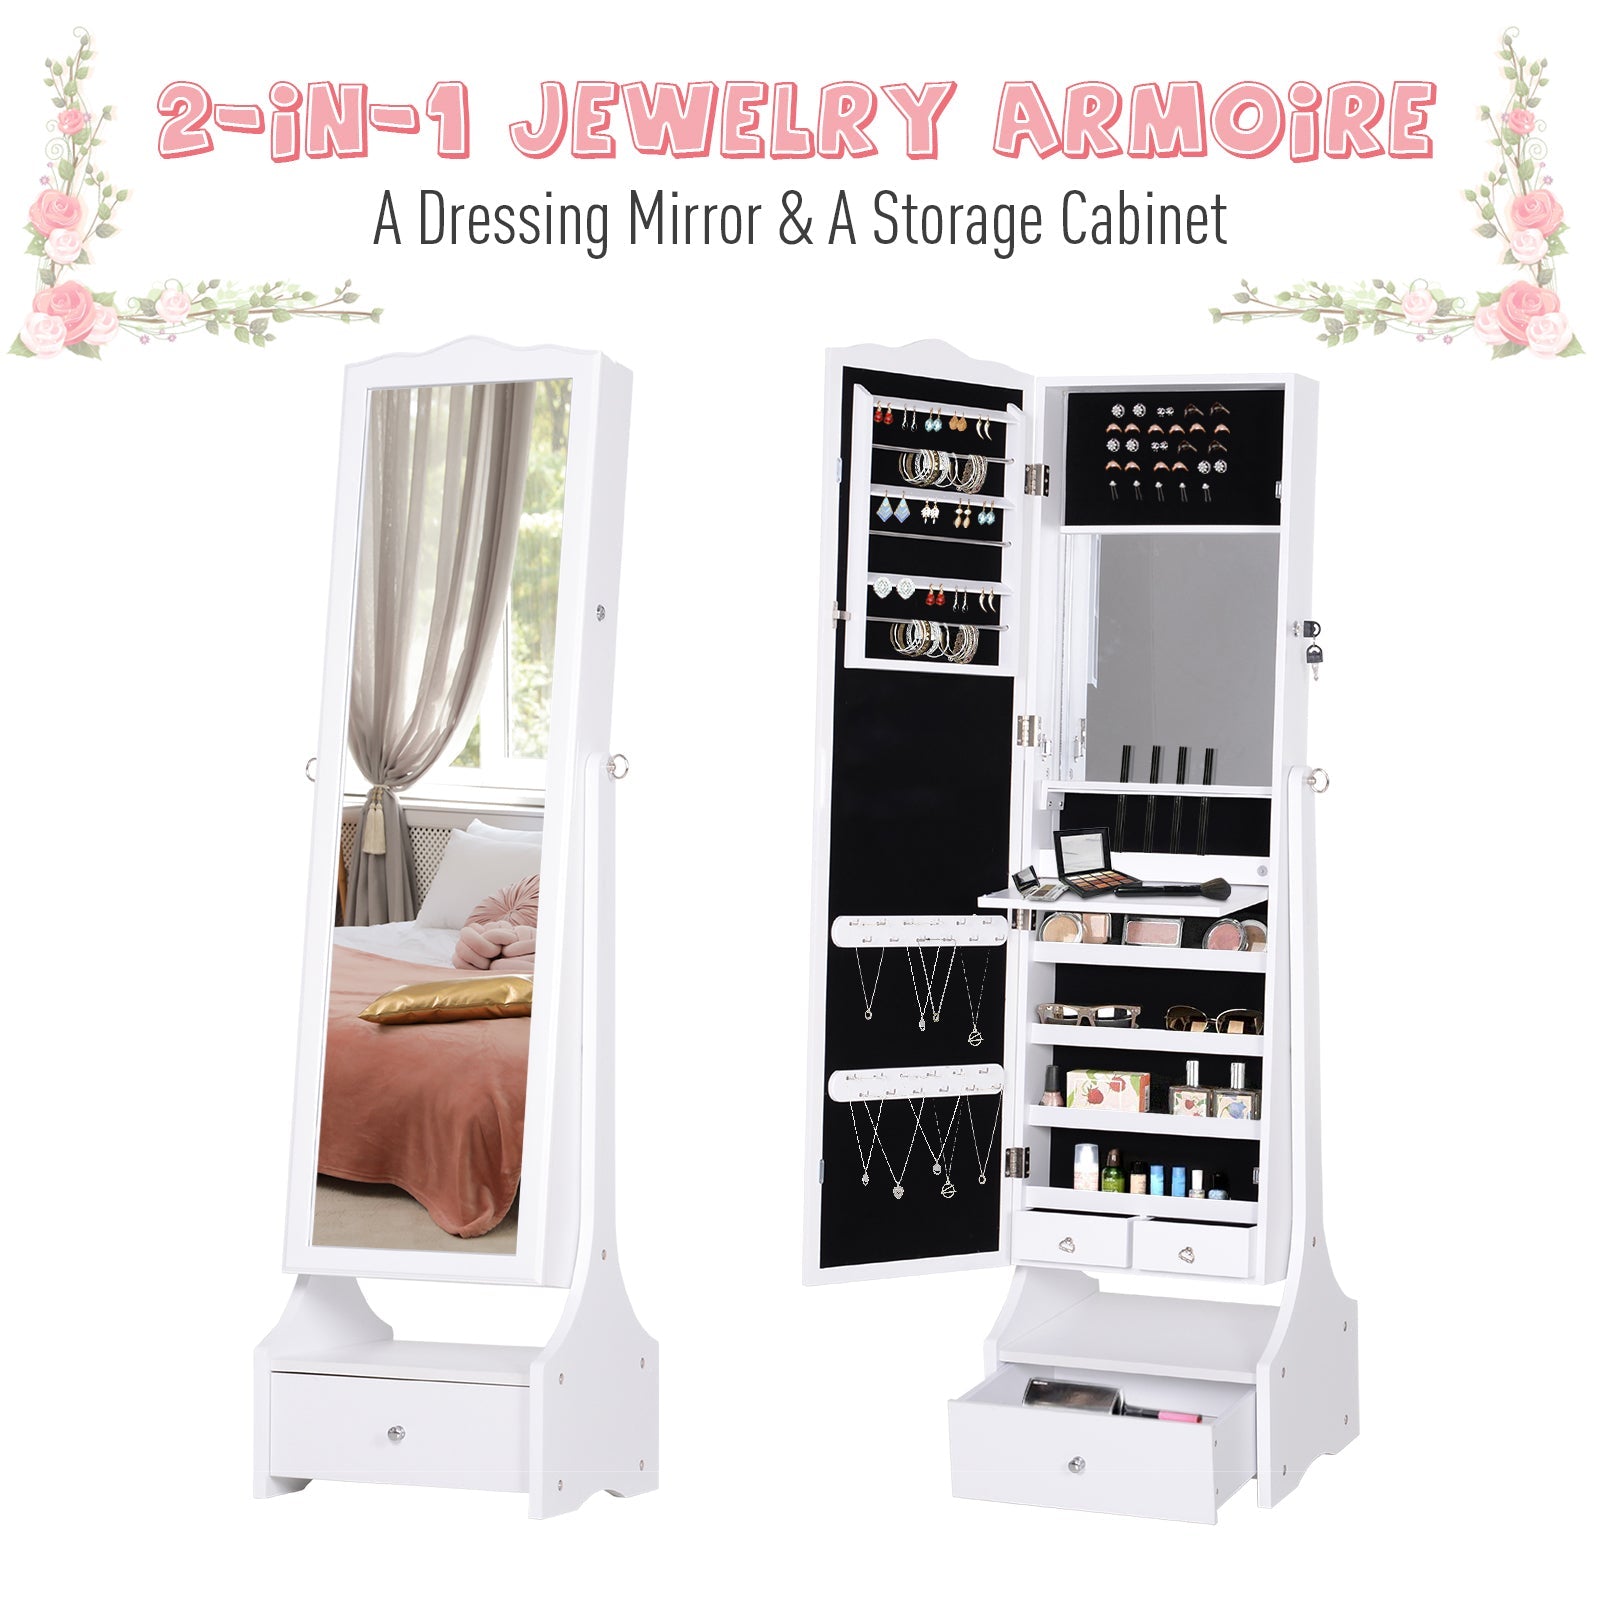 HOMCOM LED Jewellery Cabinet, Floor Standing Mirror Armoire with Flip-over Makeup Shelf and Lock, White - TovaHaus